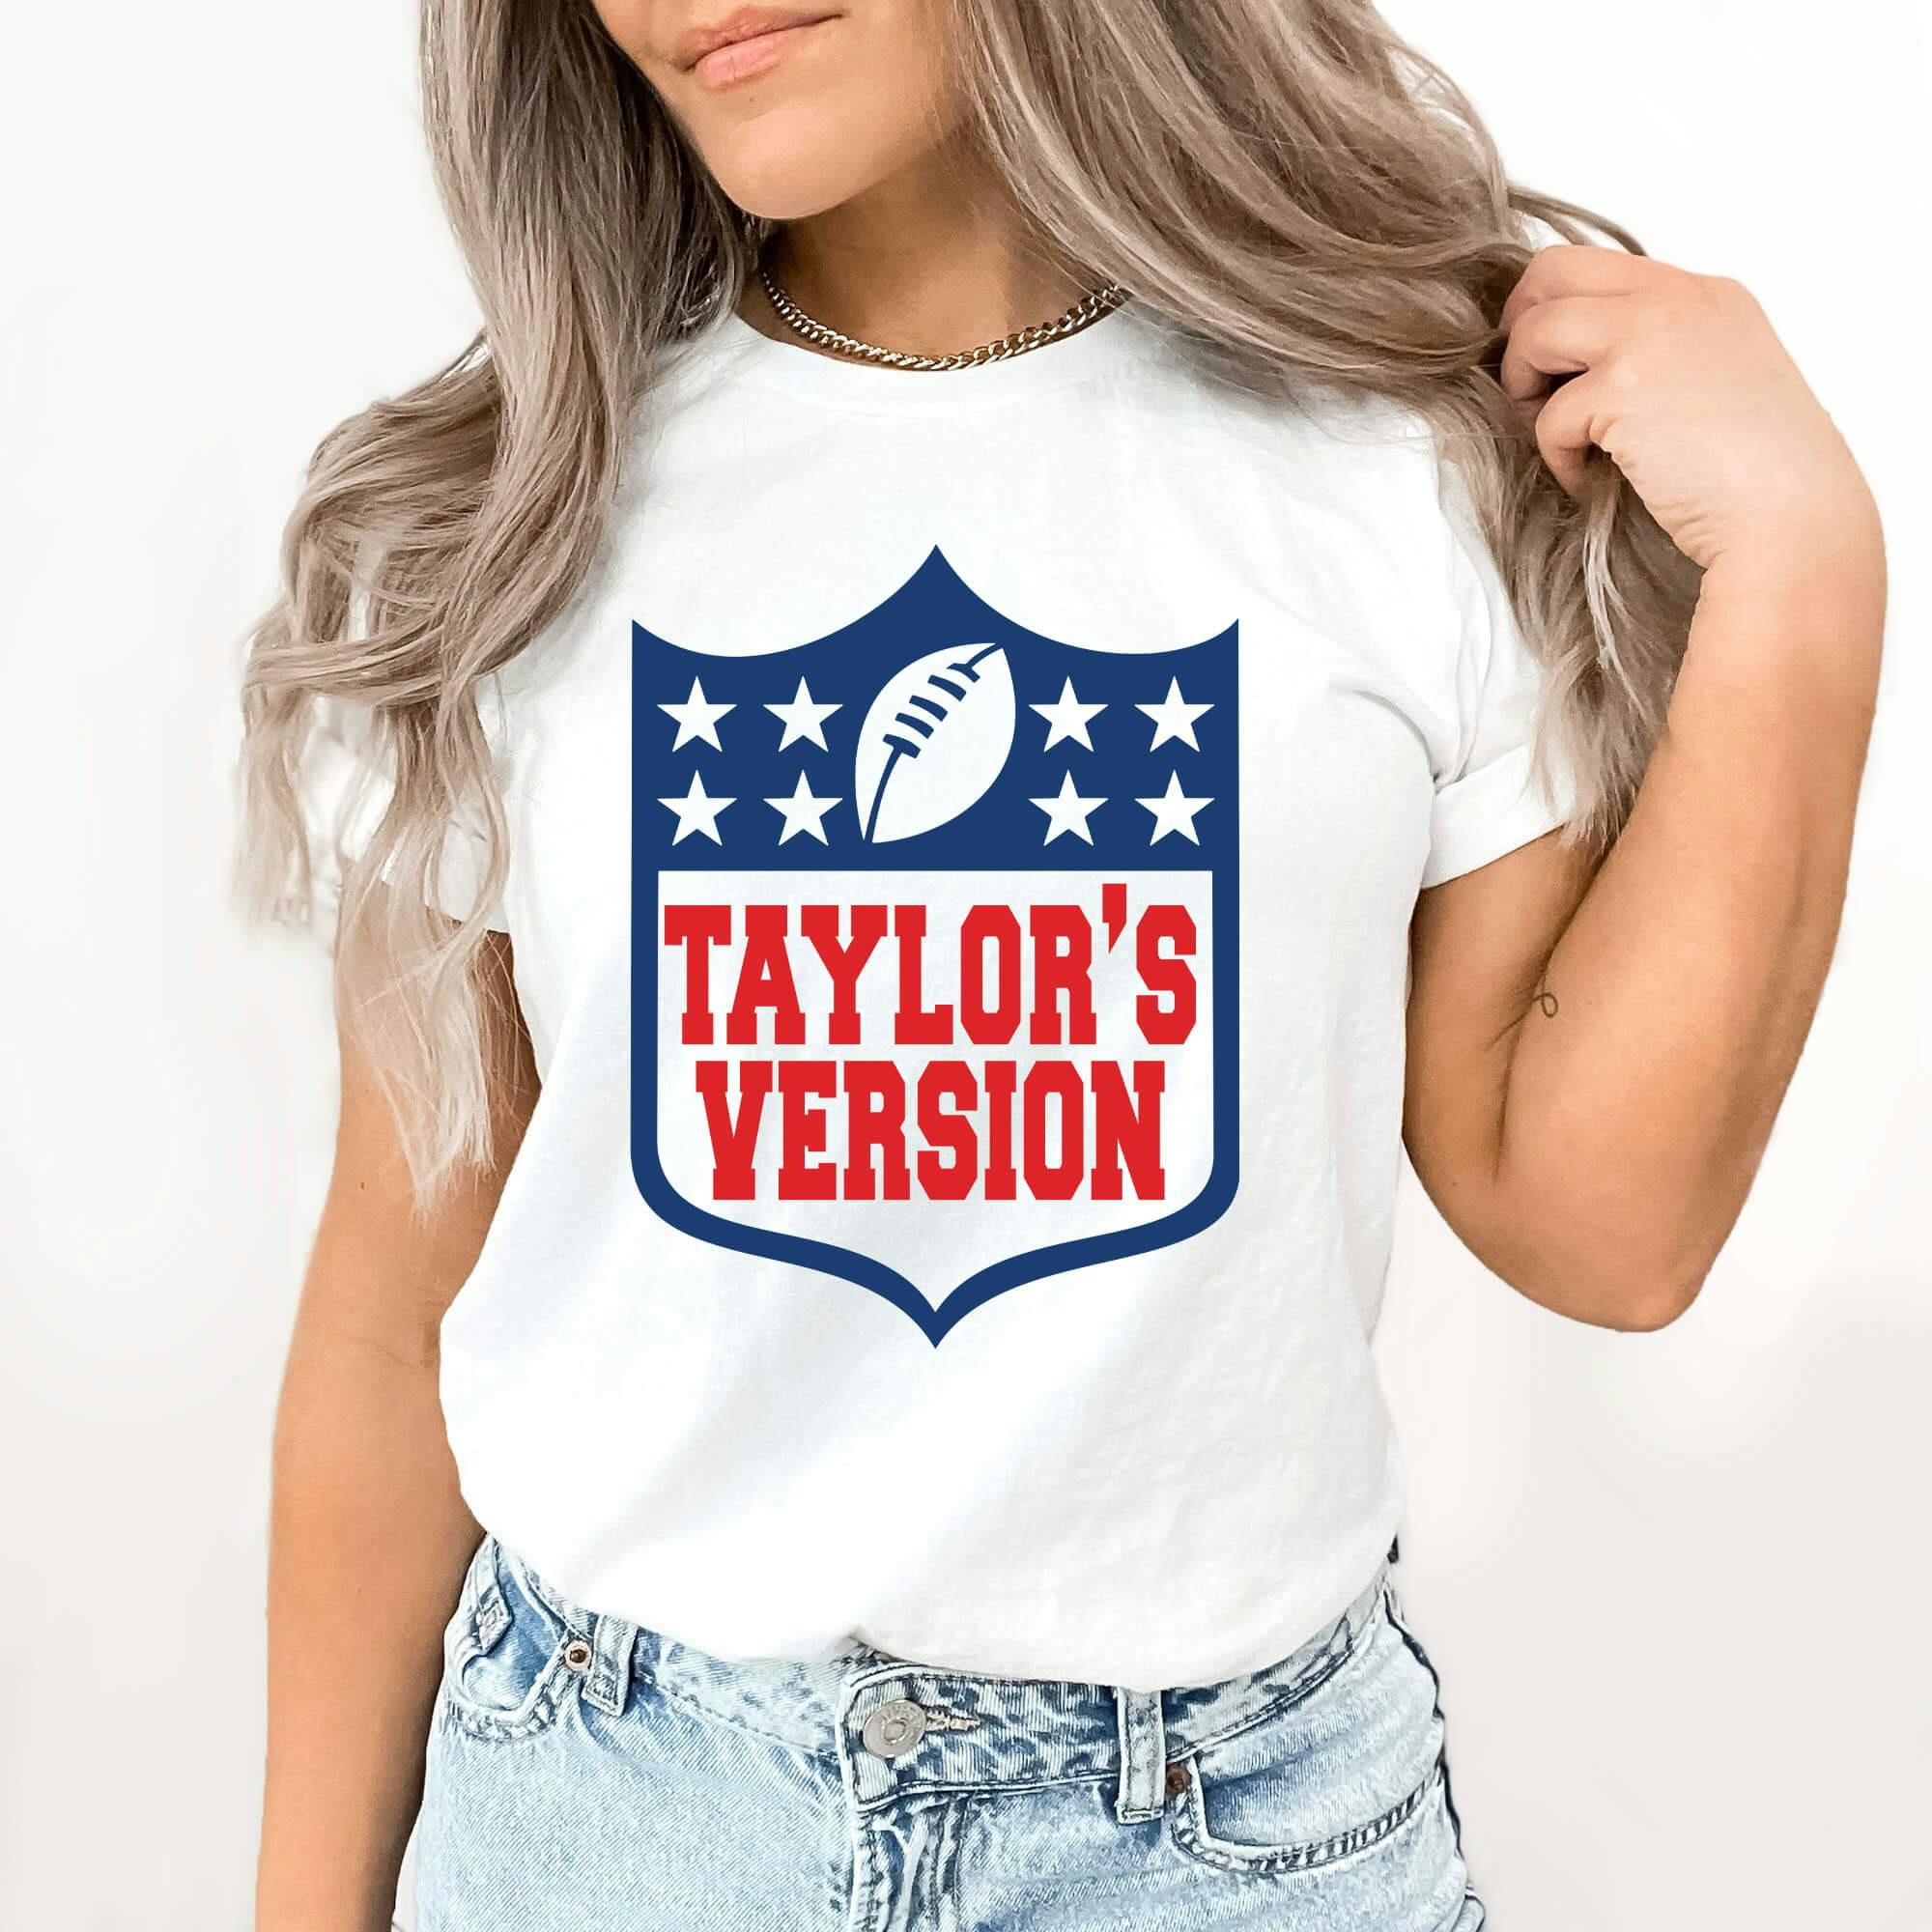 Taylor's Football Version Graphic Tee | Trending | Travis | Team | Romance | Concert | Music | Sports | Layering Tee - undefined - BEADSBEE BOUTIQUE